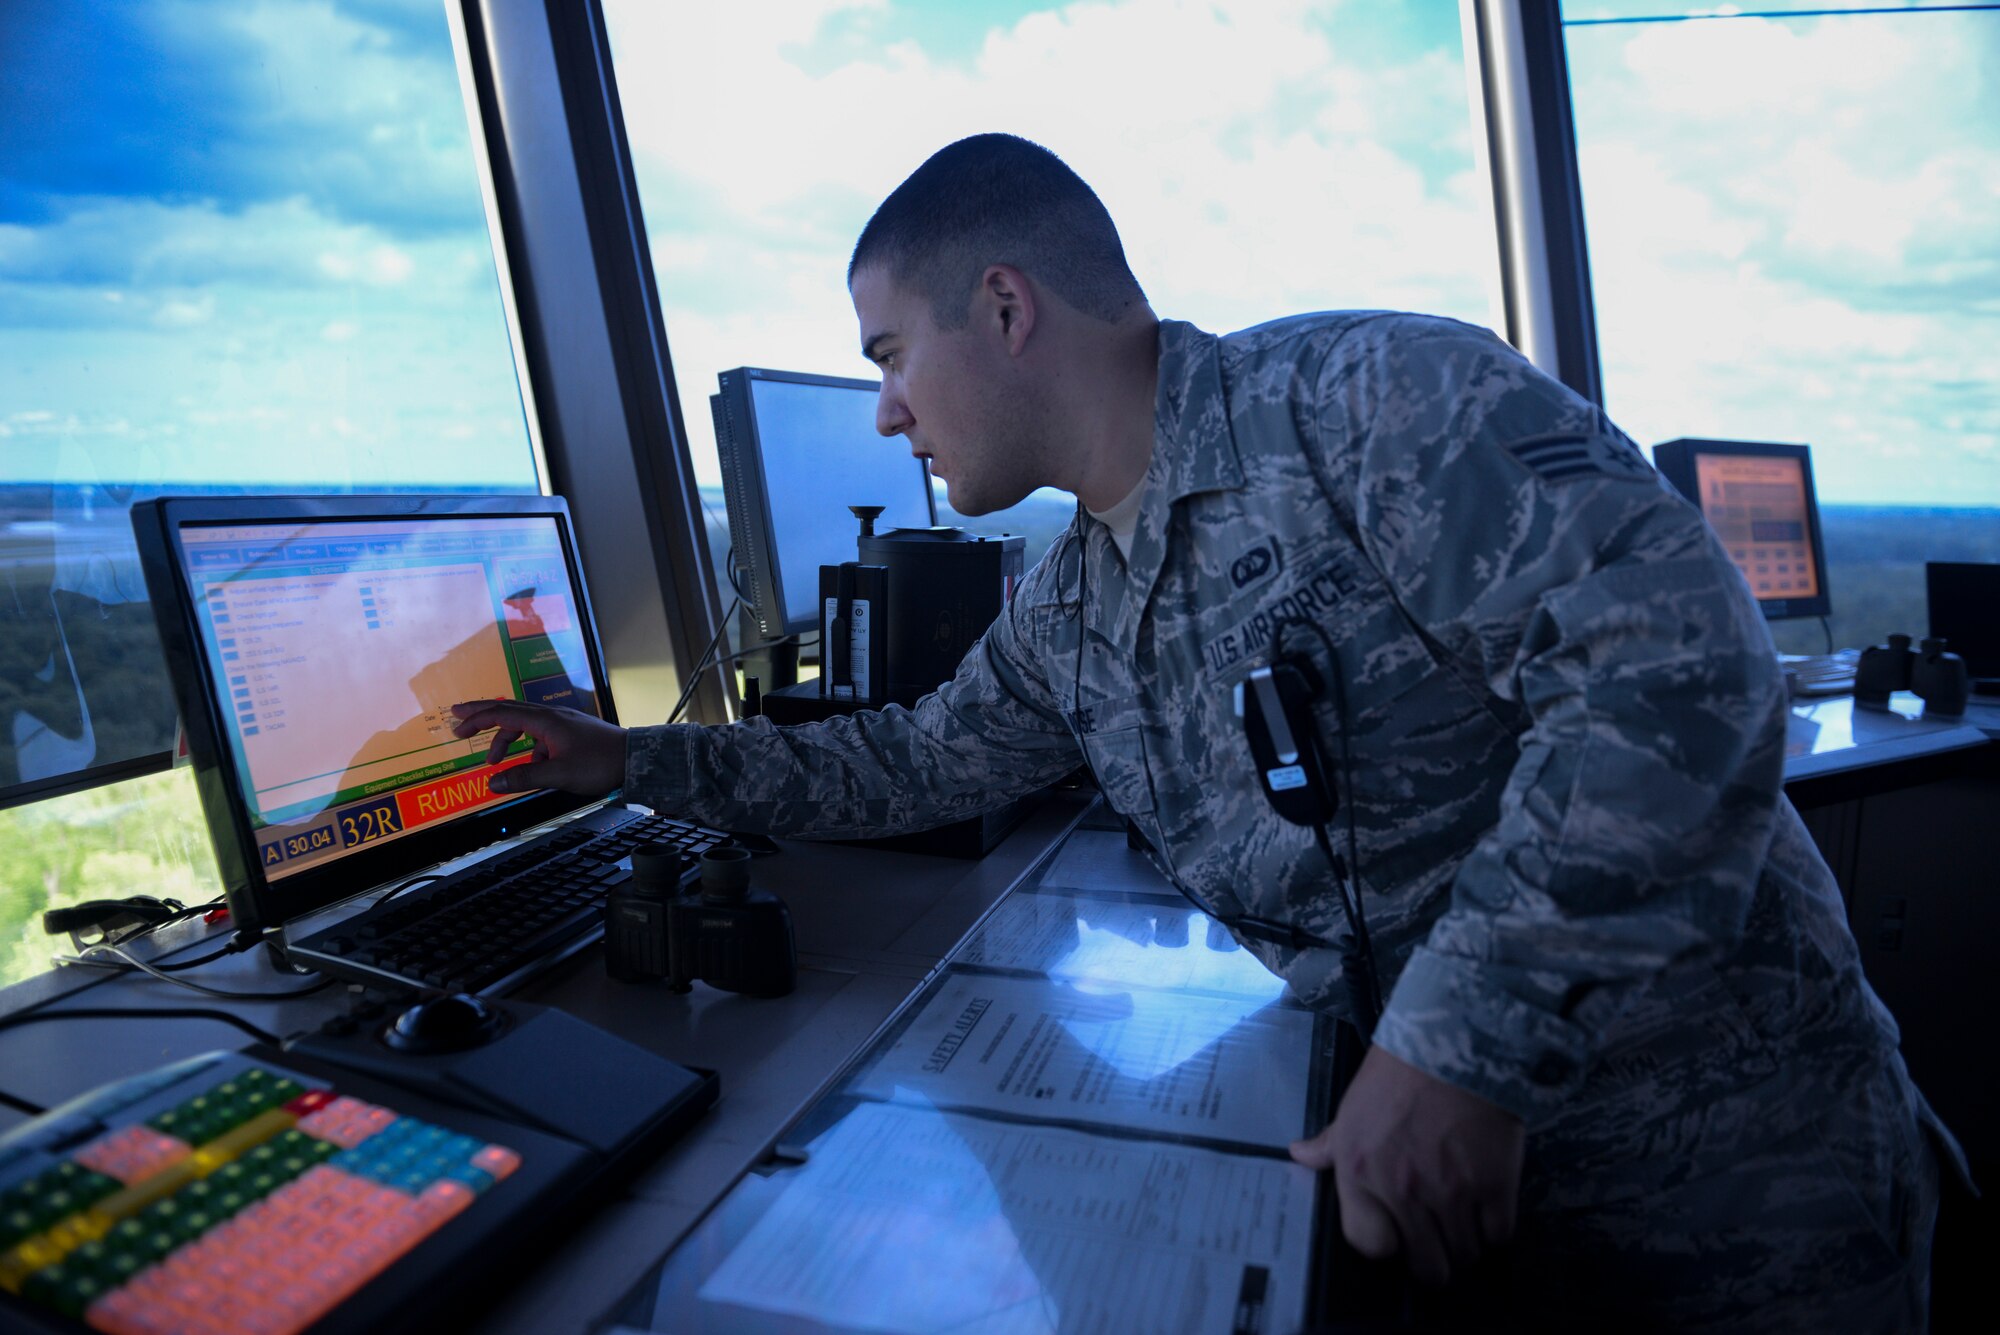 Senior Airman Joshua Rose, 375th Operations Support Squadron Air Traffic Controller, monitors flights within Scott Air Force Base, Illinois airspace, May 27, 2015. The Acushnet, Massachusetts native has been stationed at Scott for more than 2 years, and in his off duty time, he can found volunteering in the surrounding communities. (U.S. Air Force photo by Airman 1st Class Erica Crossen)